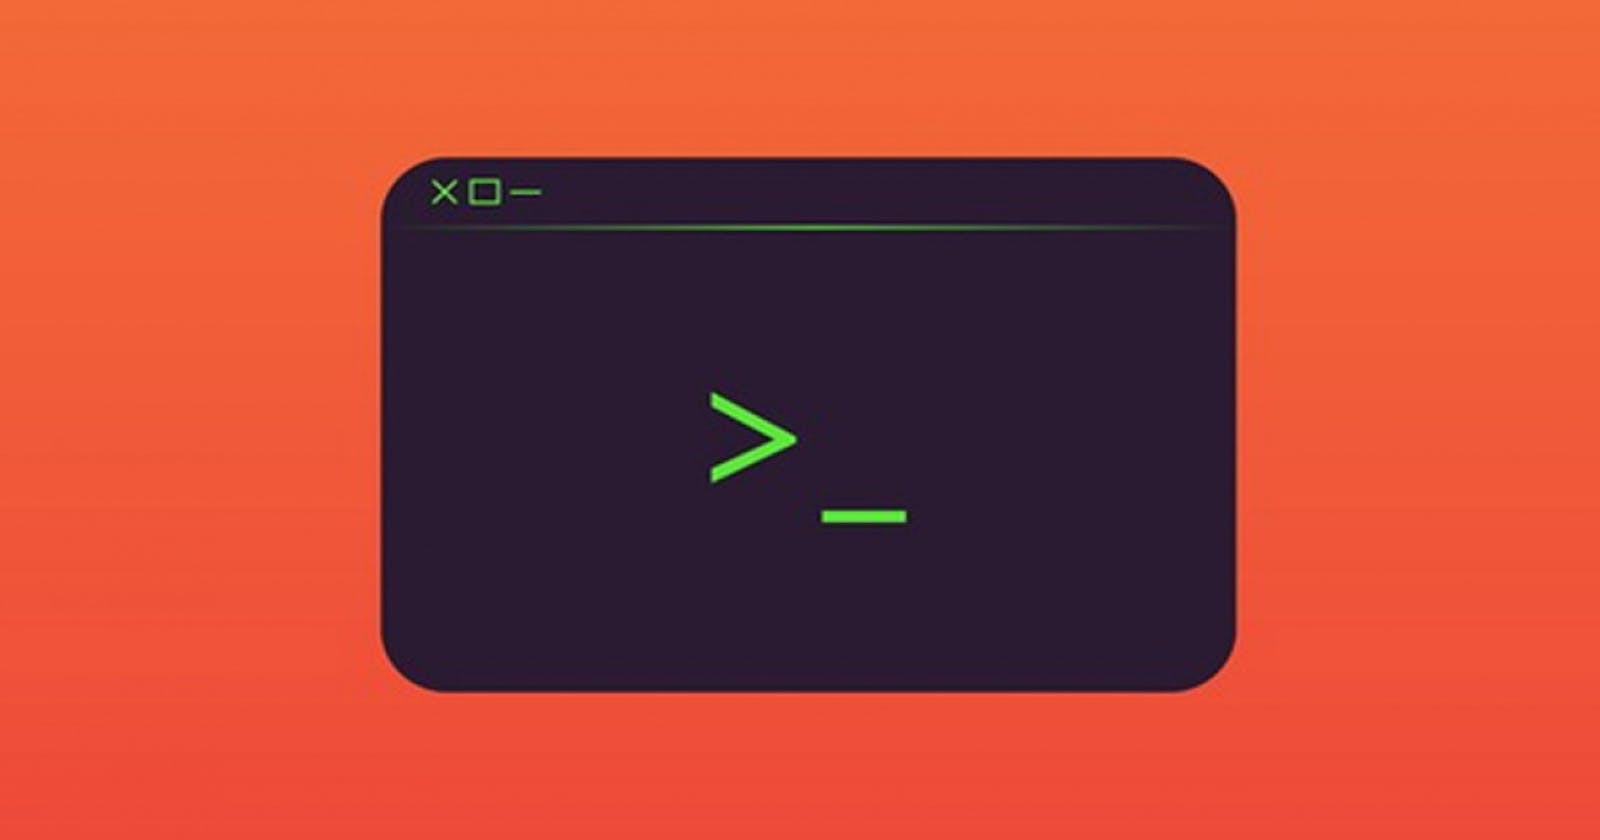 How To Build CLI App In Rust Using Clap